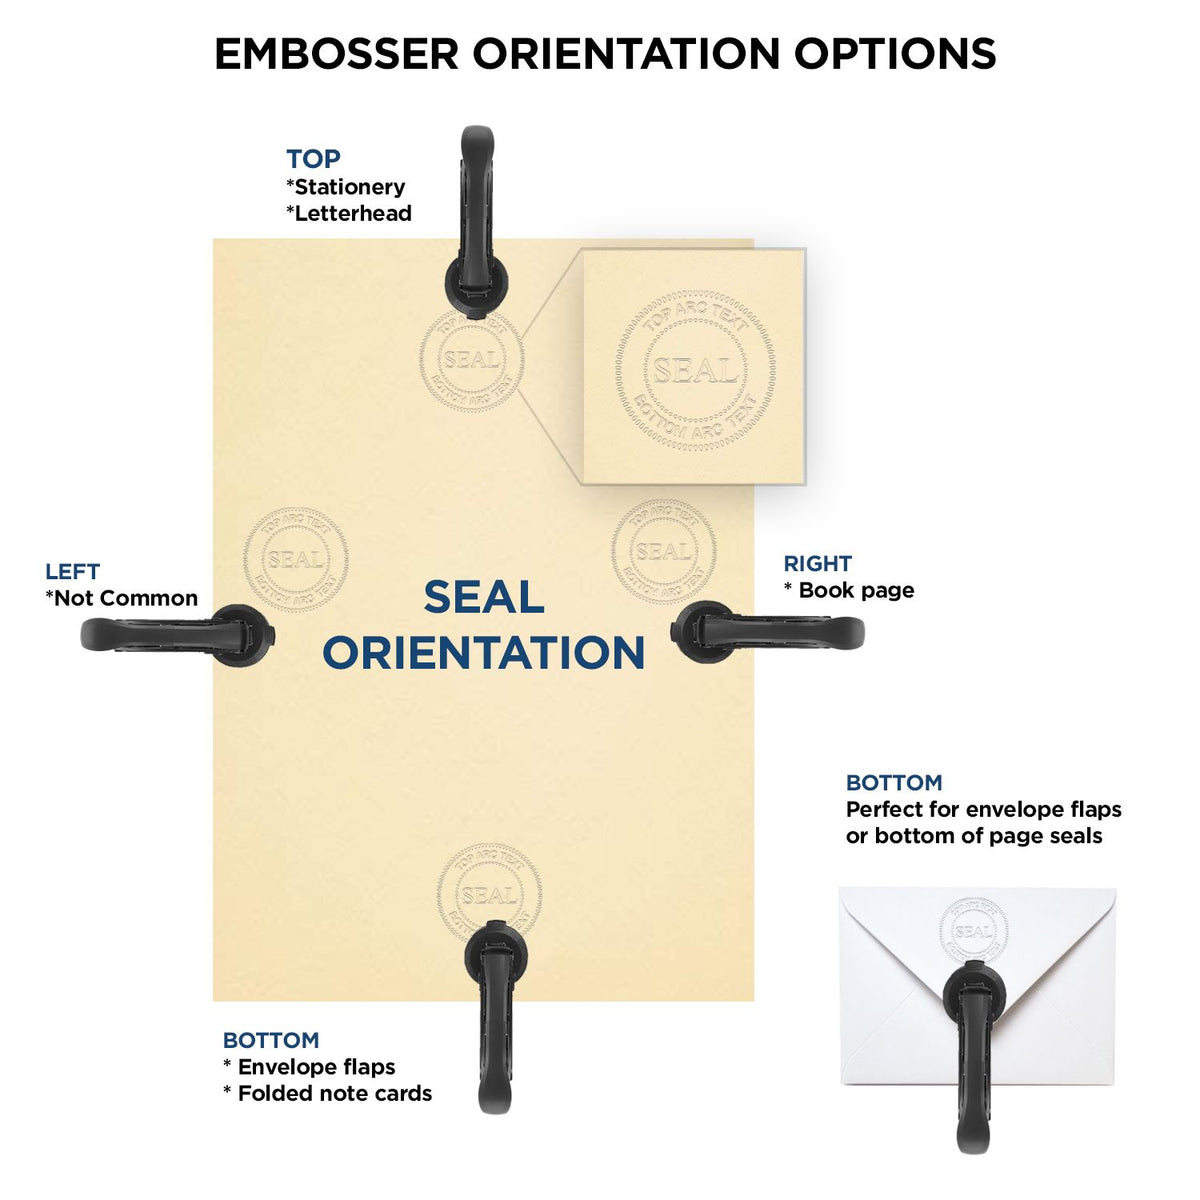 An infographic for the Extended Long Reach Minnesota Surveyor Embosser showing embosser orientation, this is showing examples of a top, bottom, right and left insert.